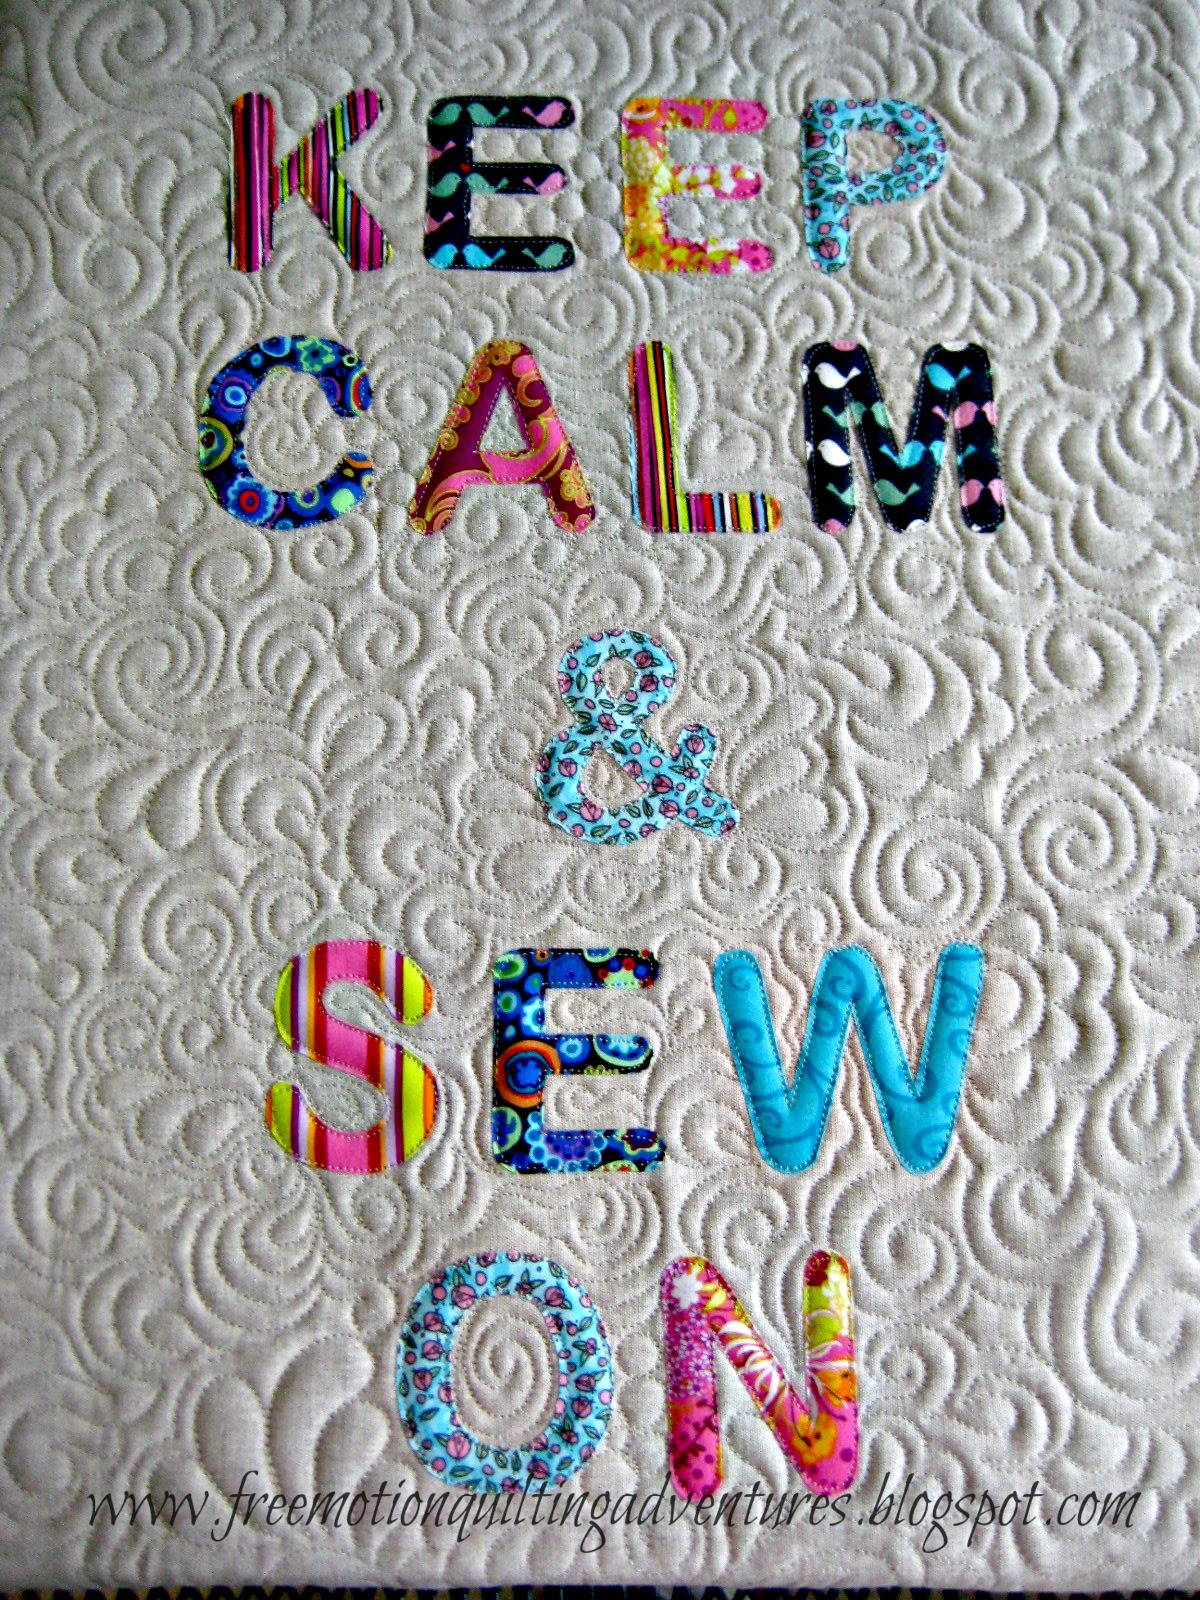 Keep Calm and Sew On quilted version